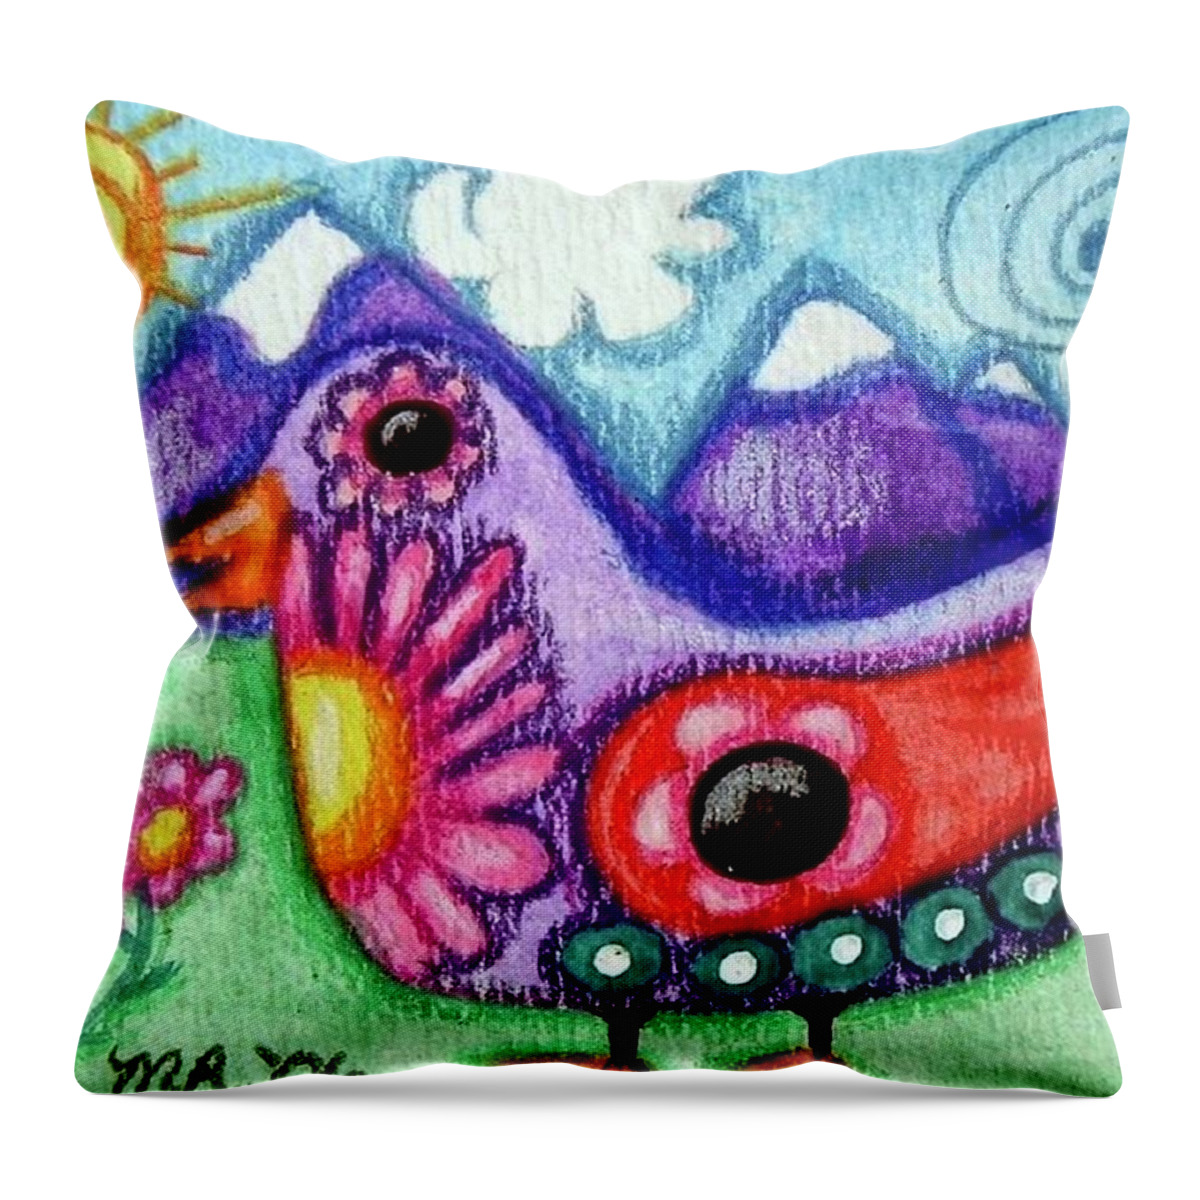 Whimsical Throw Pillow featuring the painting Whimsical Bird by Monica Resinger